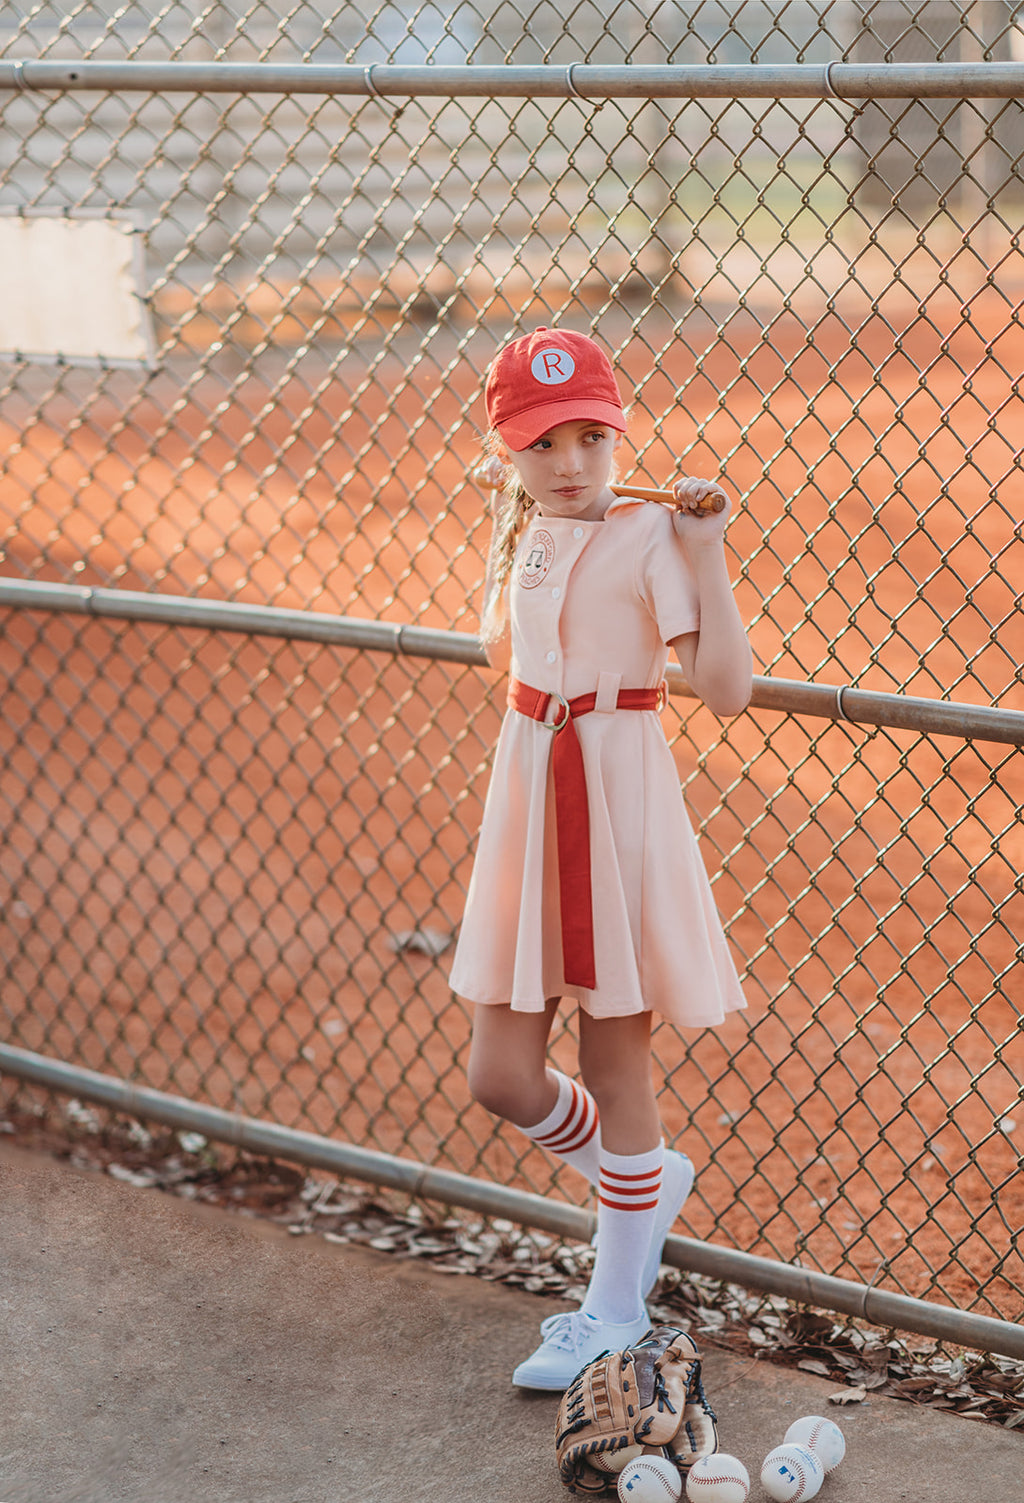 Little League Classic Uniforms for the Angels and Indians — UNISWAG